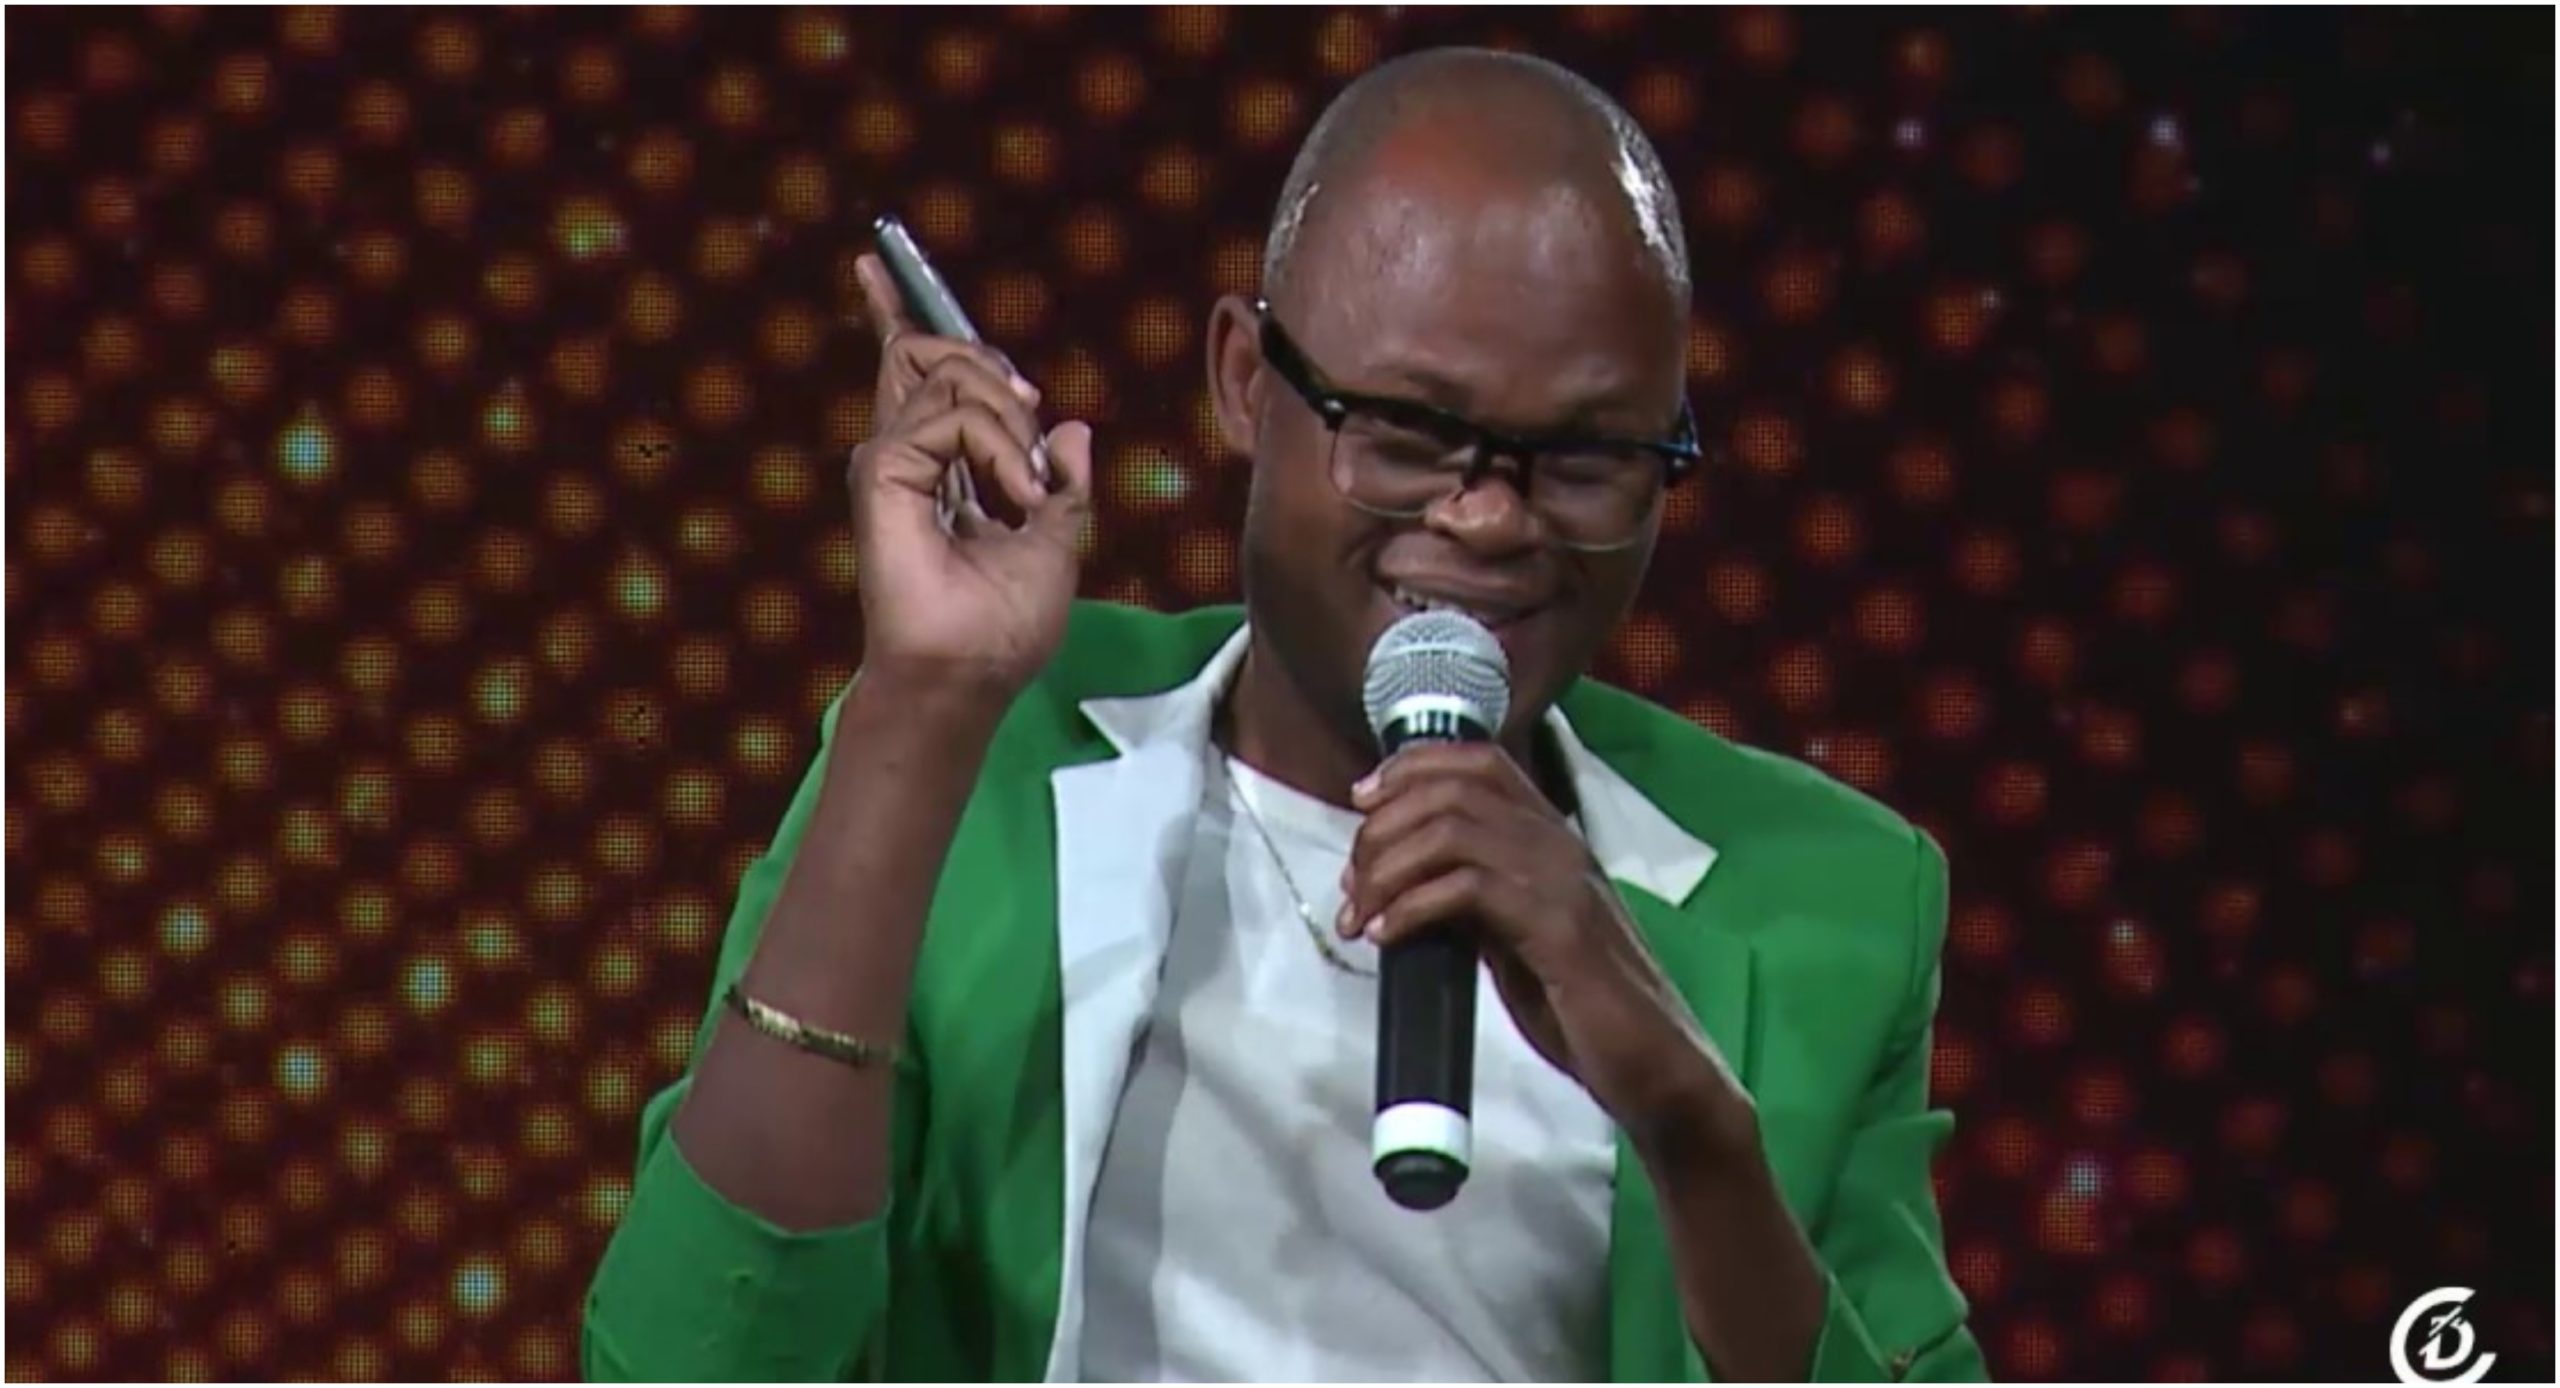 Churchill Show's Othuol in a past performance